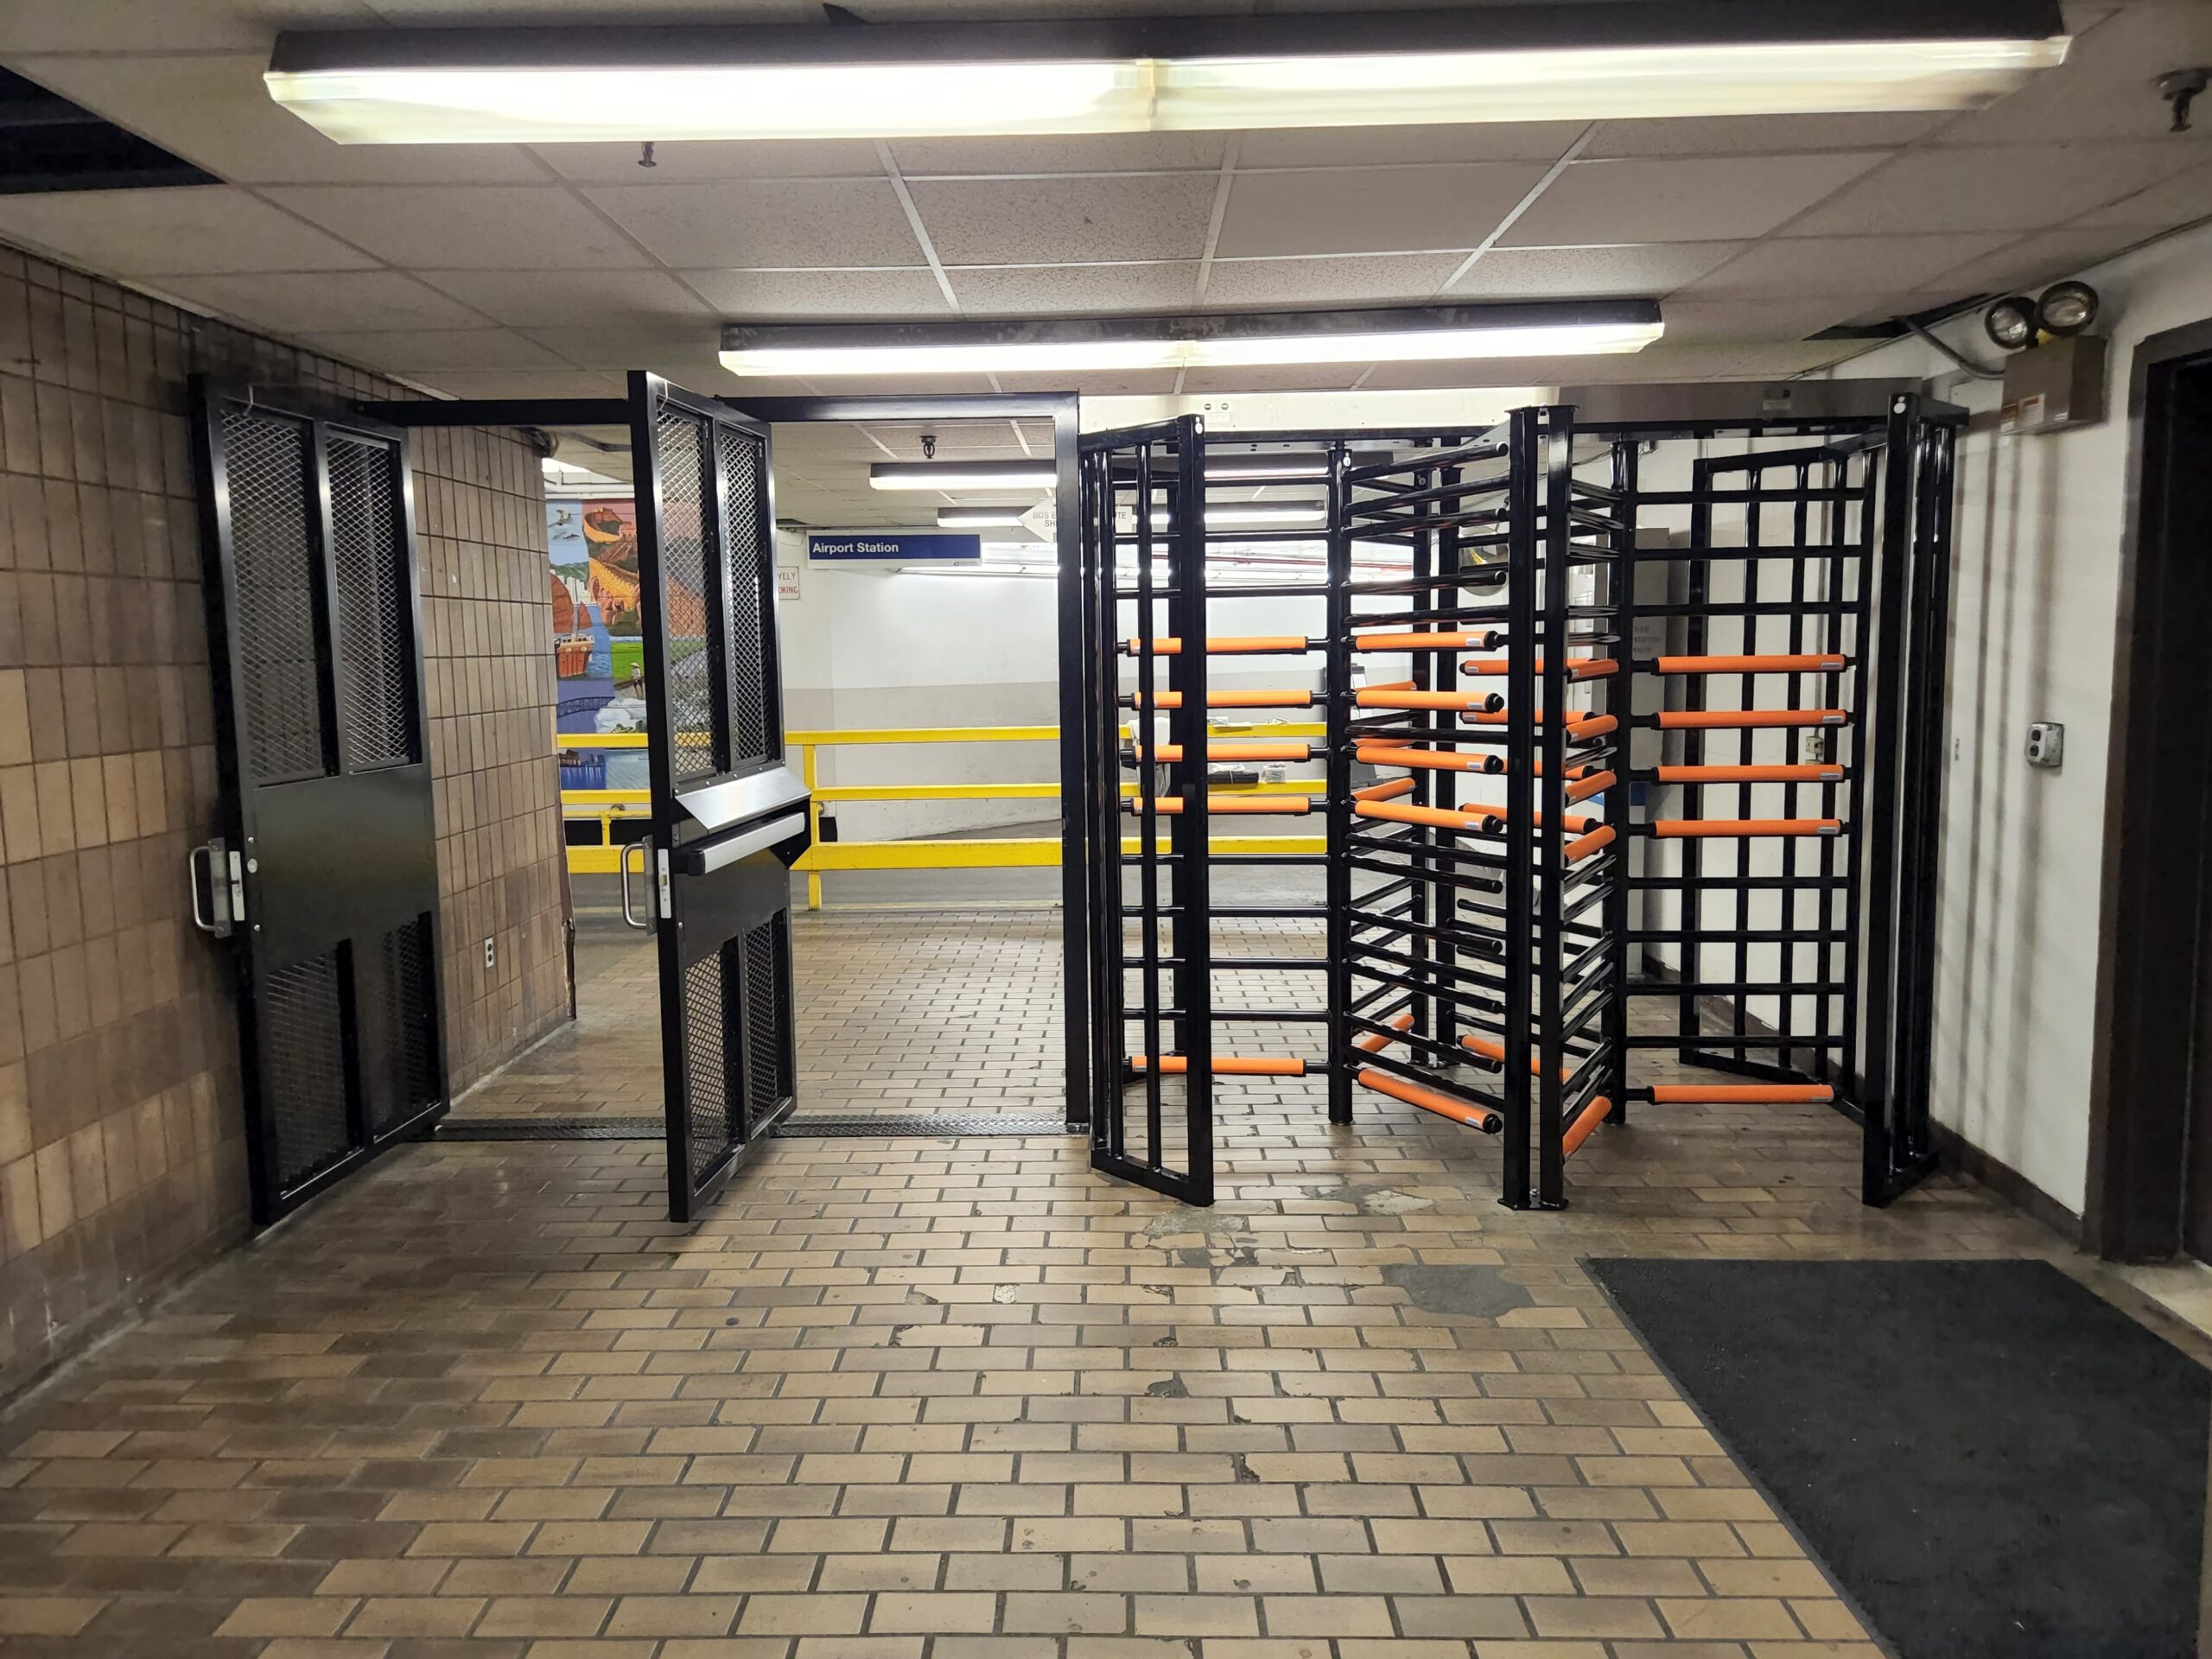 1 tandem full height turnstile and 2 full height ADA gates in a hallway at JFK international airport